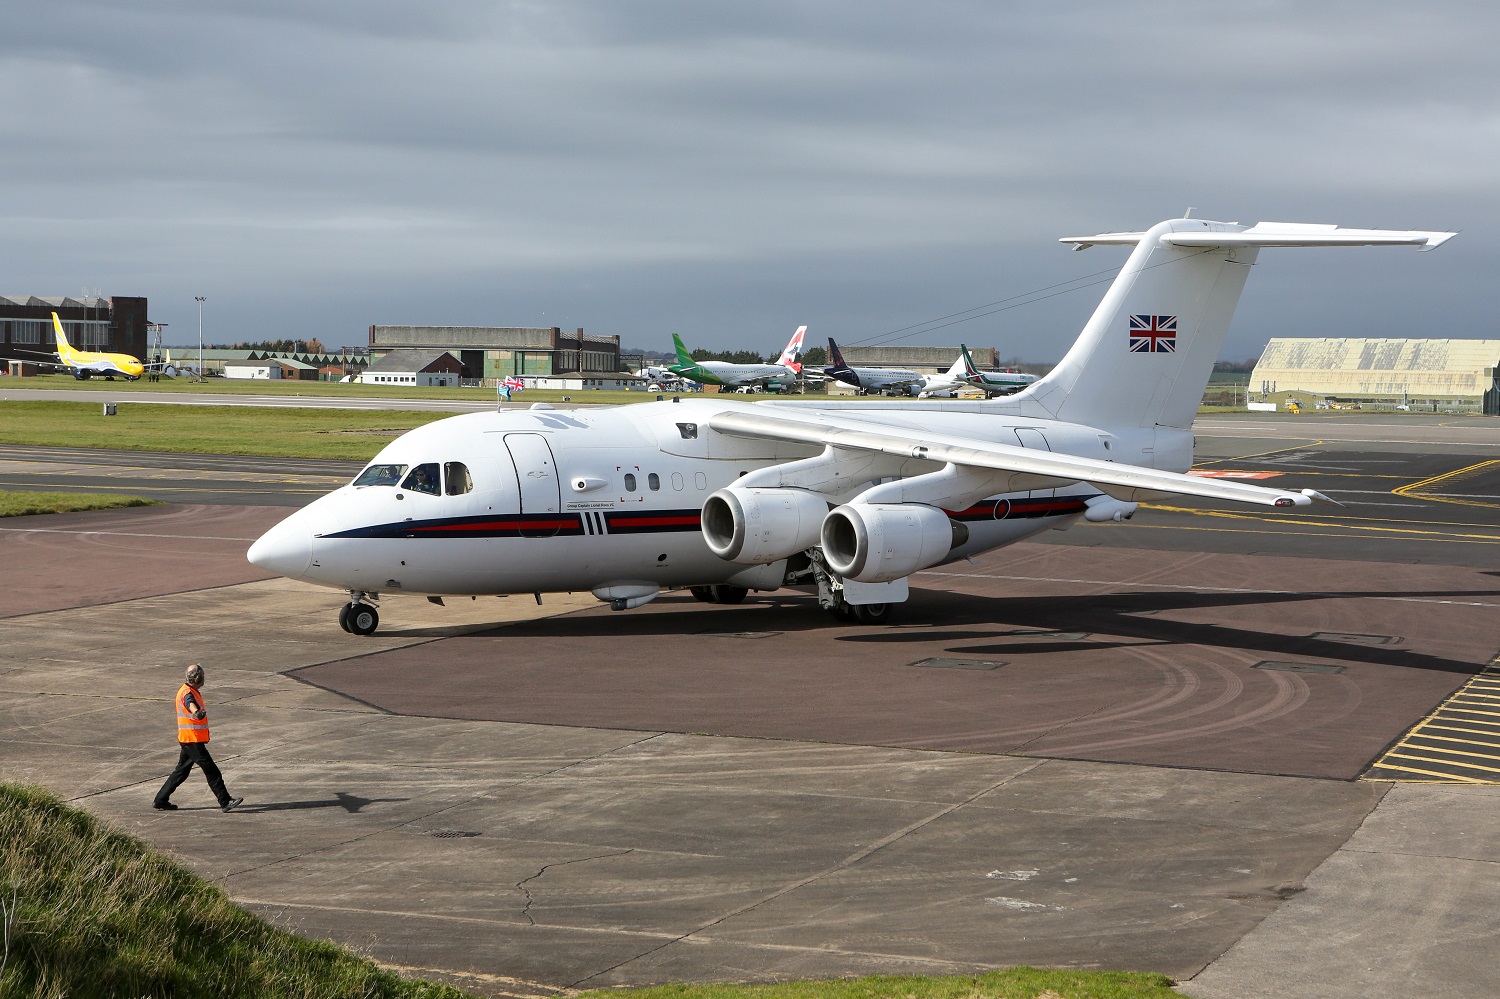 BAe146 aircraft on the airfield.